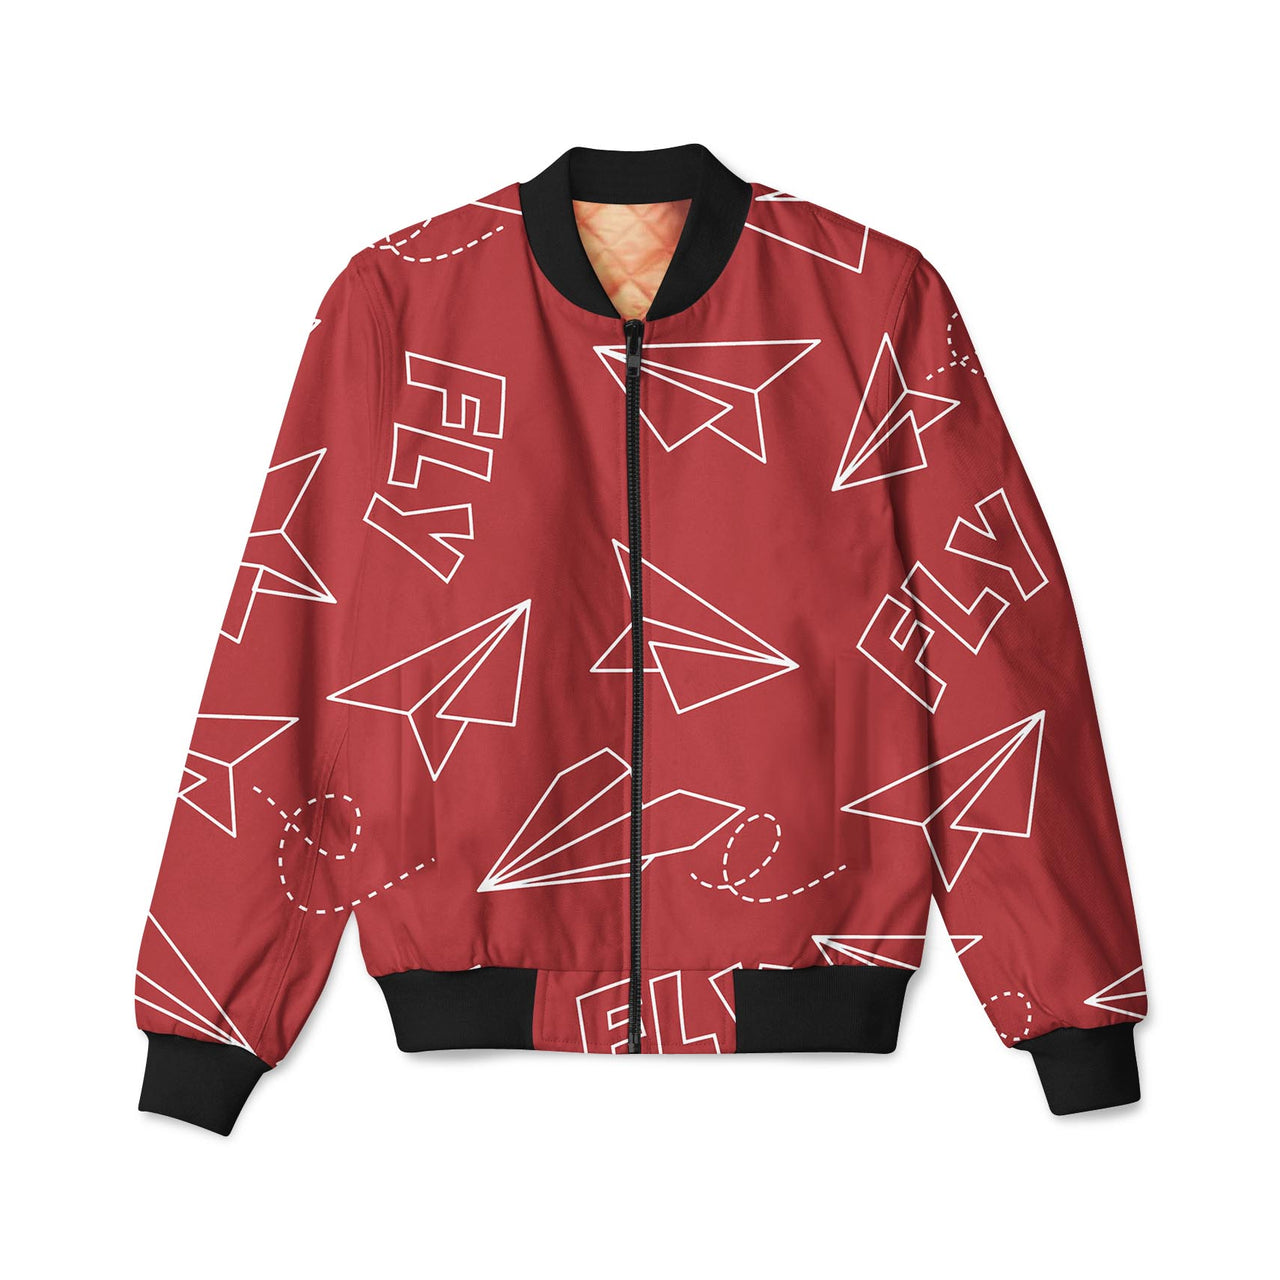 Paper Airplane & Fly (Red) Designed 3D Pilot Bomber Jackets